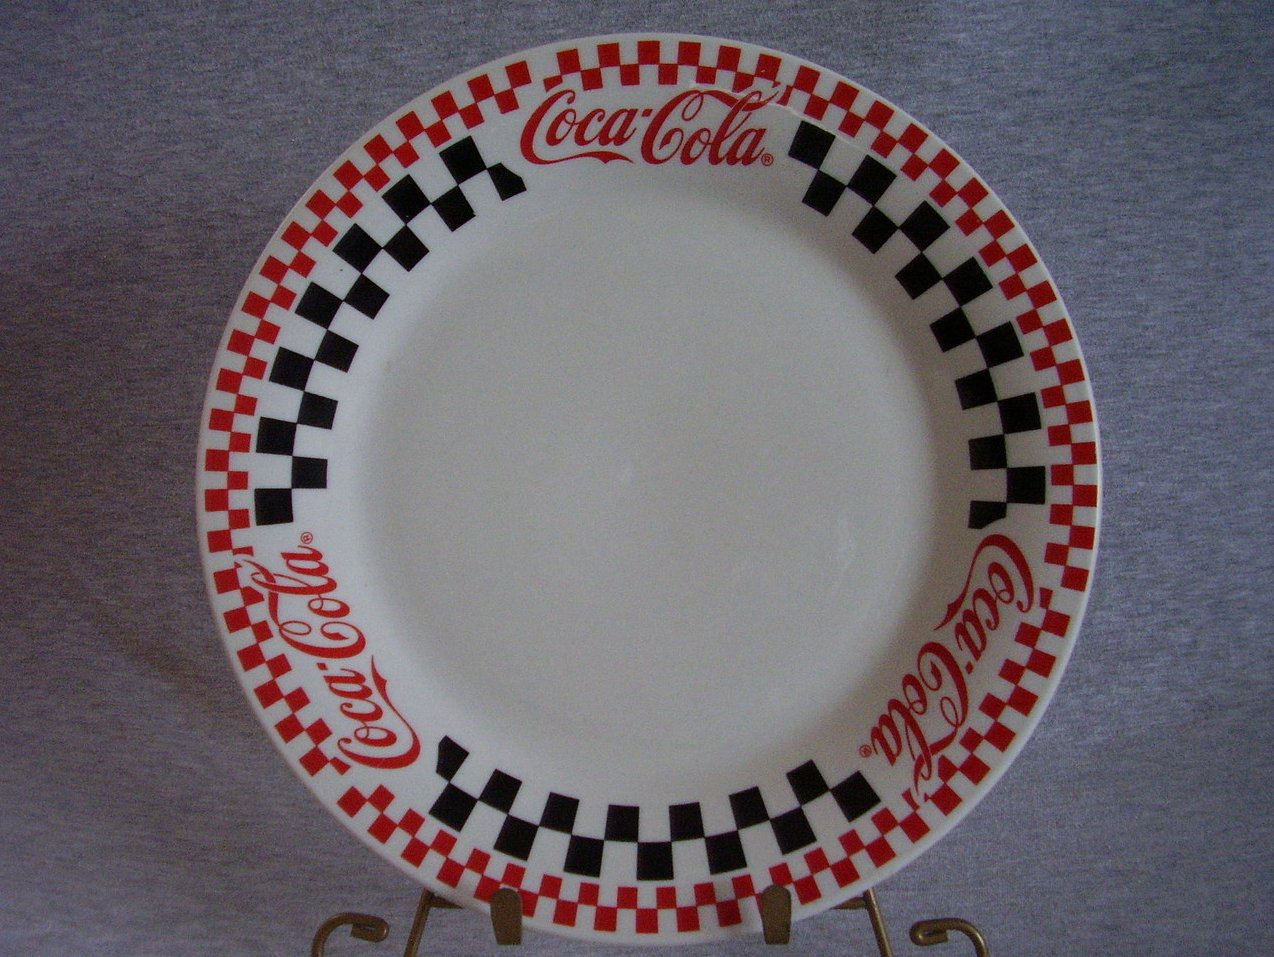 Gibson Coca Cola Dinner Plate